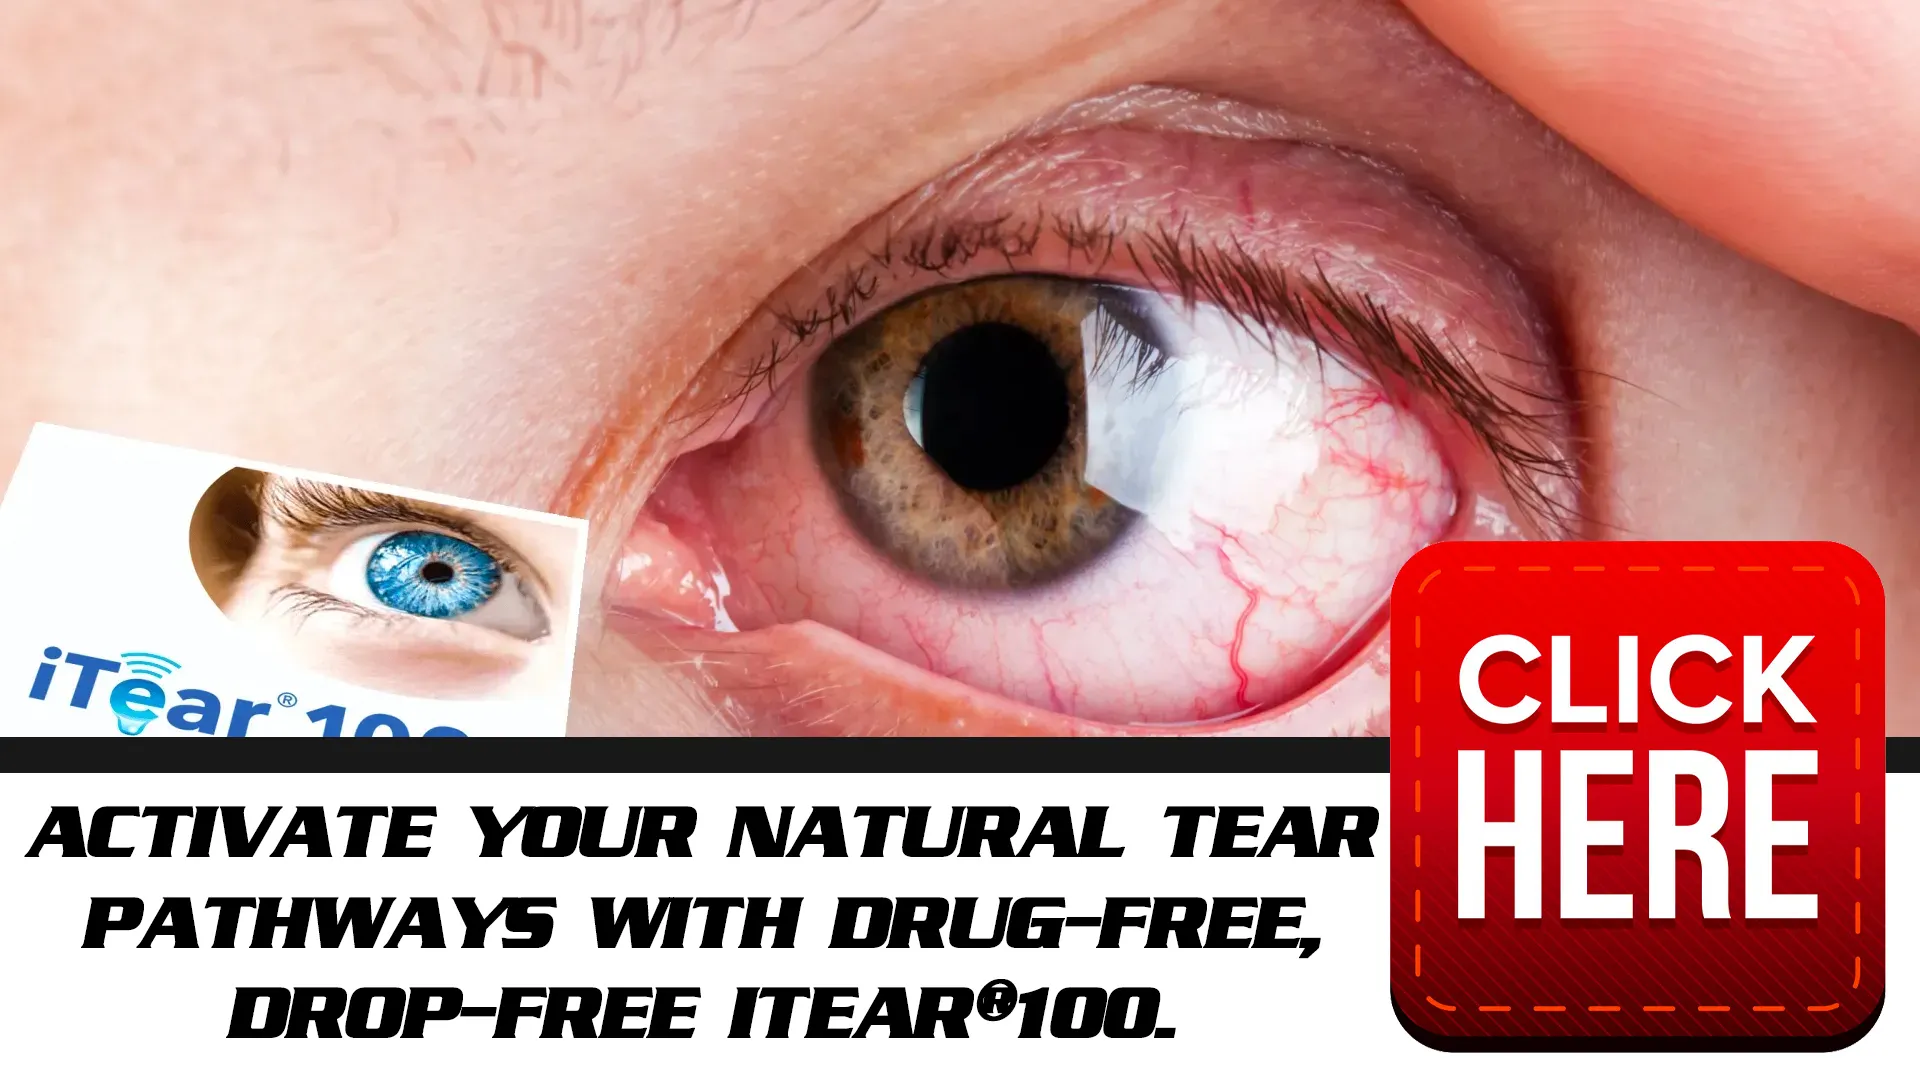 Experience Immediate Relief with iTear100